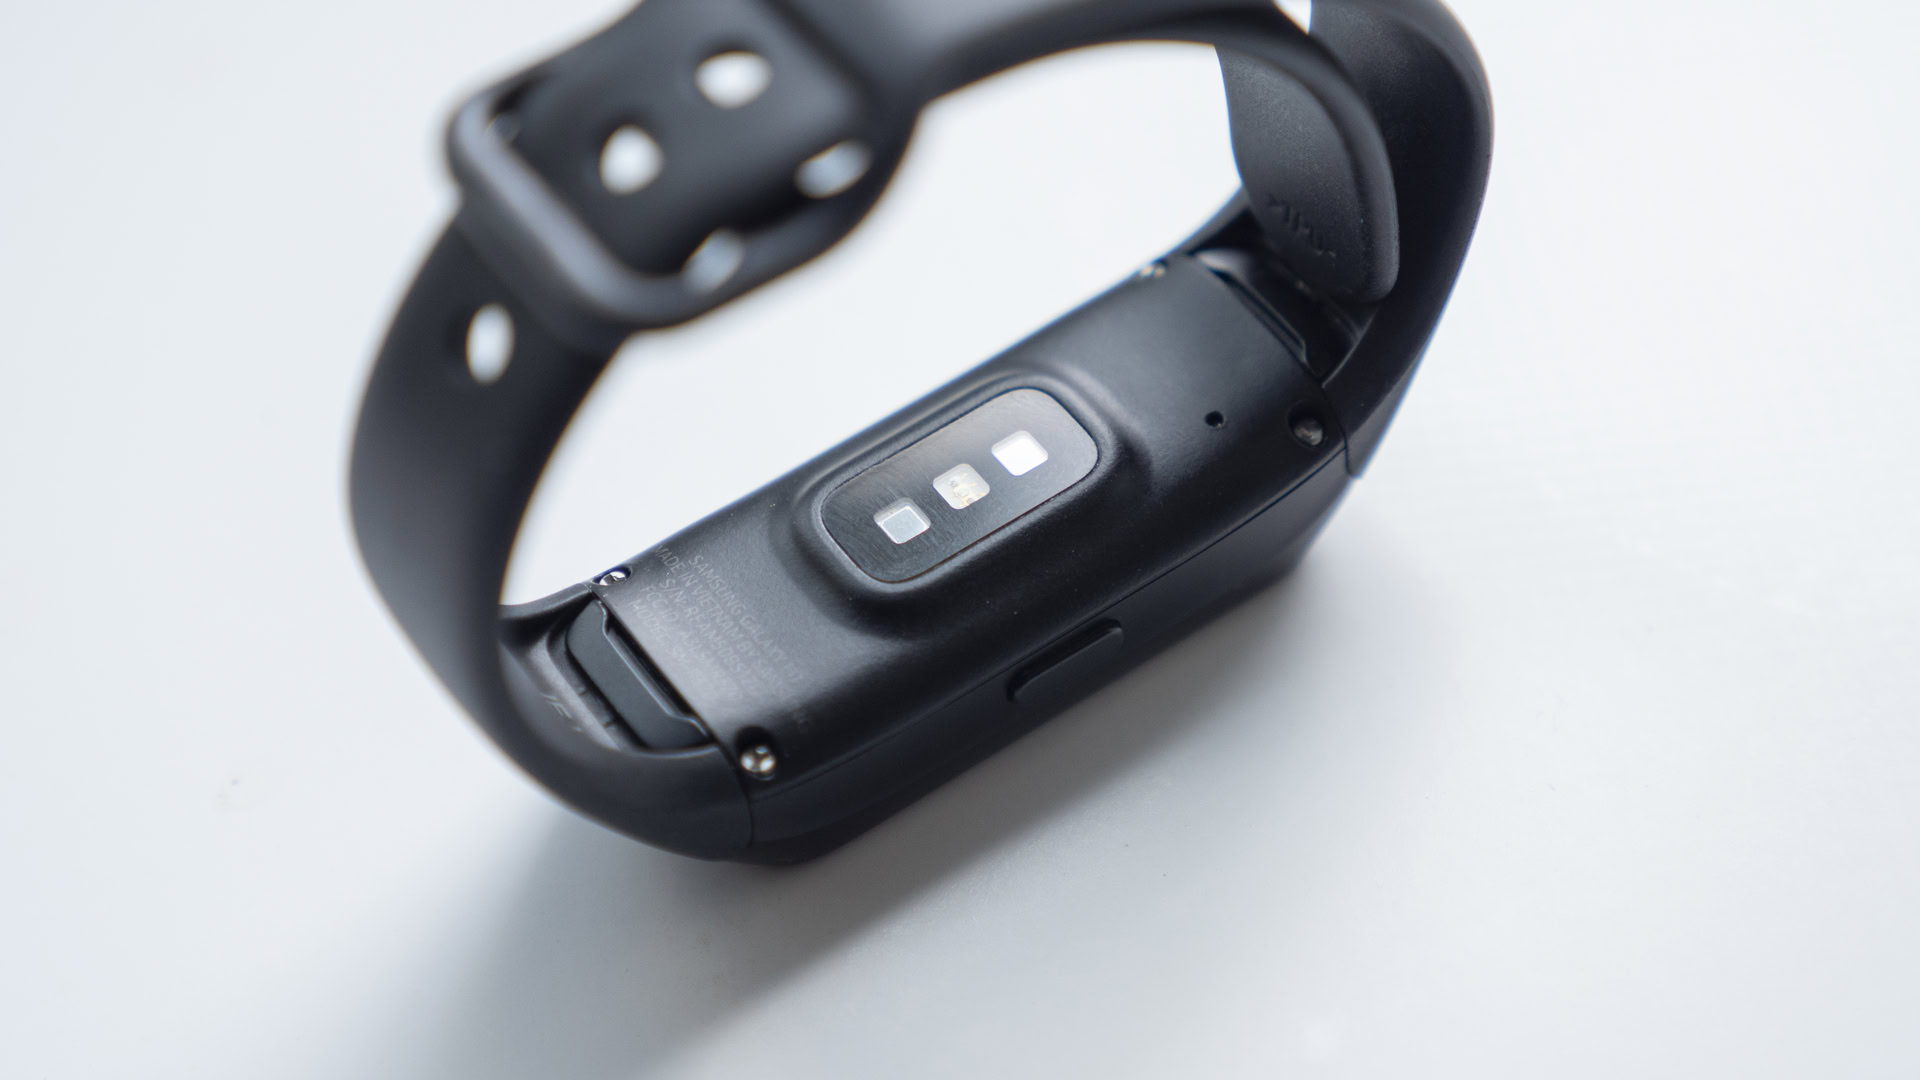 Samsung Galaxy Fit review: Is Samsung's cheap fitness tracker worth